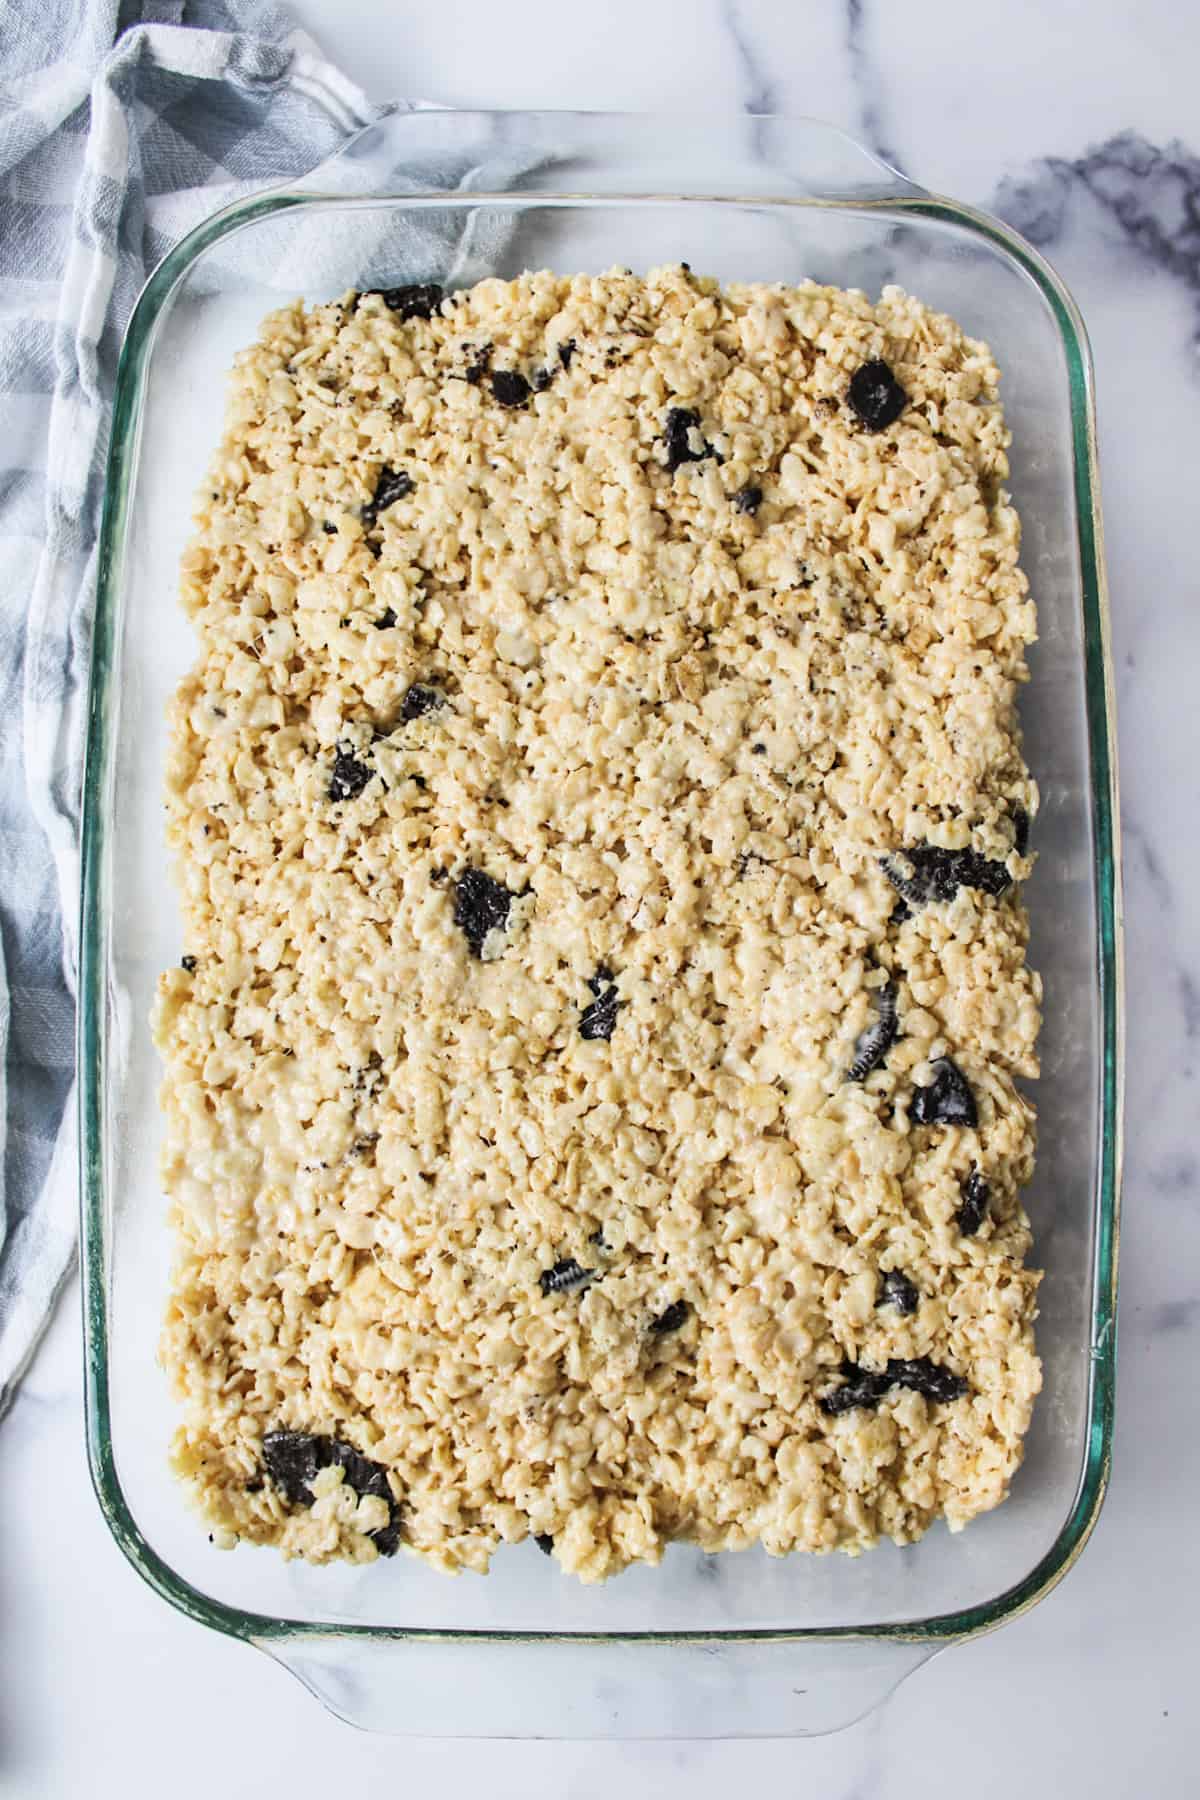 oreo rice krispie mixture pressed into a 9x13 greased baking dish